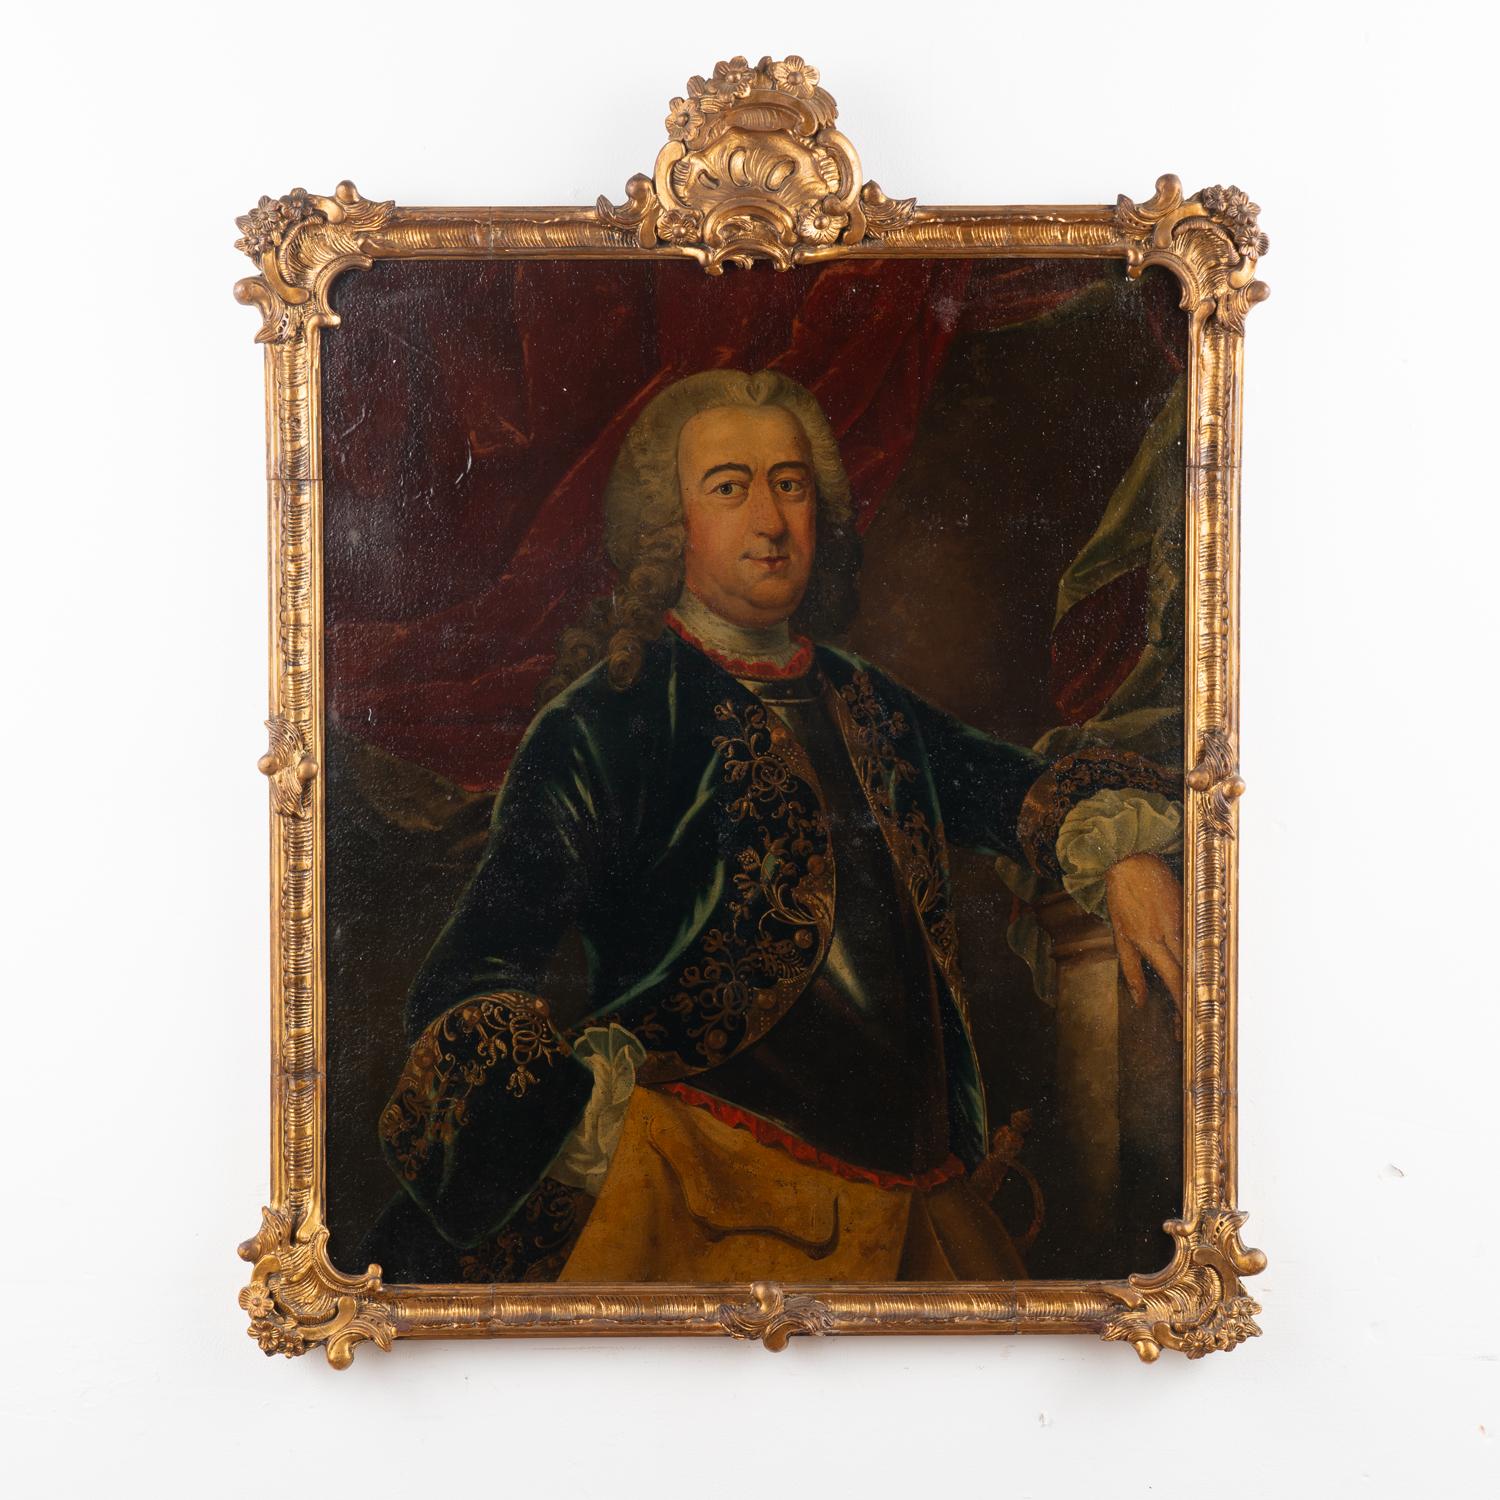 Large portrait of a gentleman wearing a blue coat with golden embroidery. Oil on canvas laid on panel.
Unsigned. Painter unknown, 18th century. Possible portrait of a monarch.
Has craquelure and retouches throughout. Canvas will benefit from